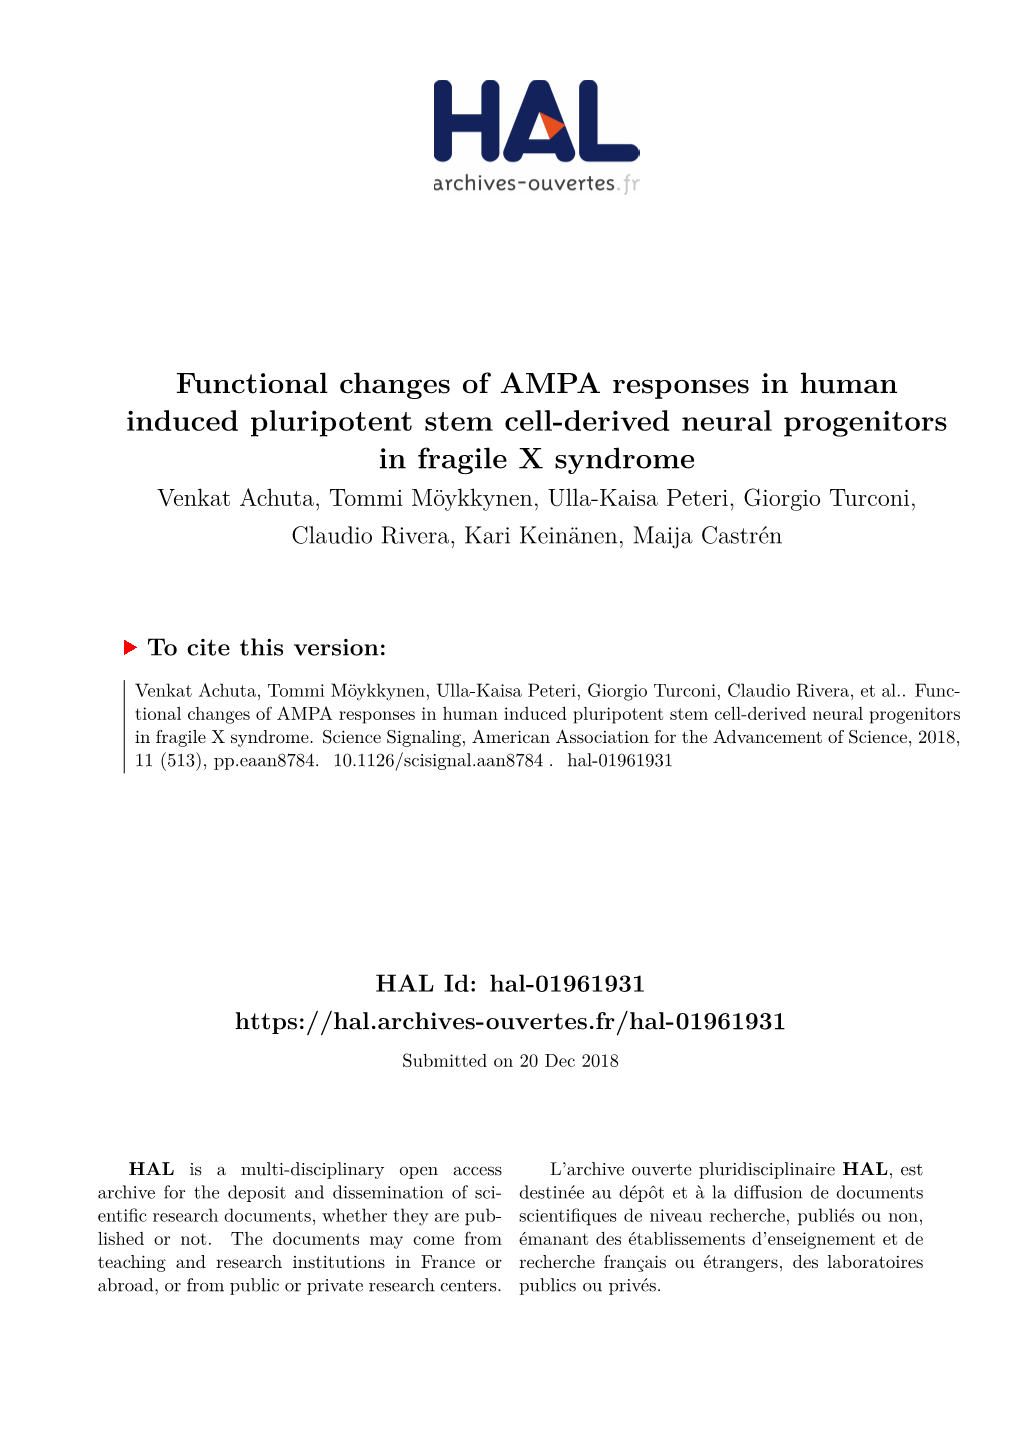 Functional Changes of AMPA Responses in Human Induced